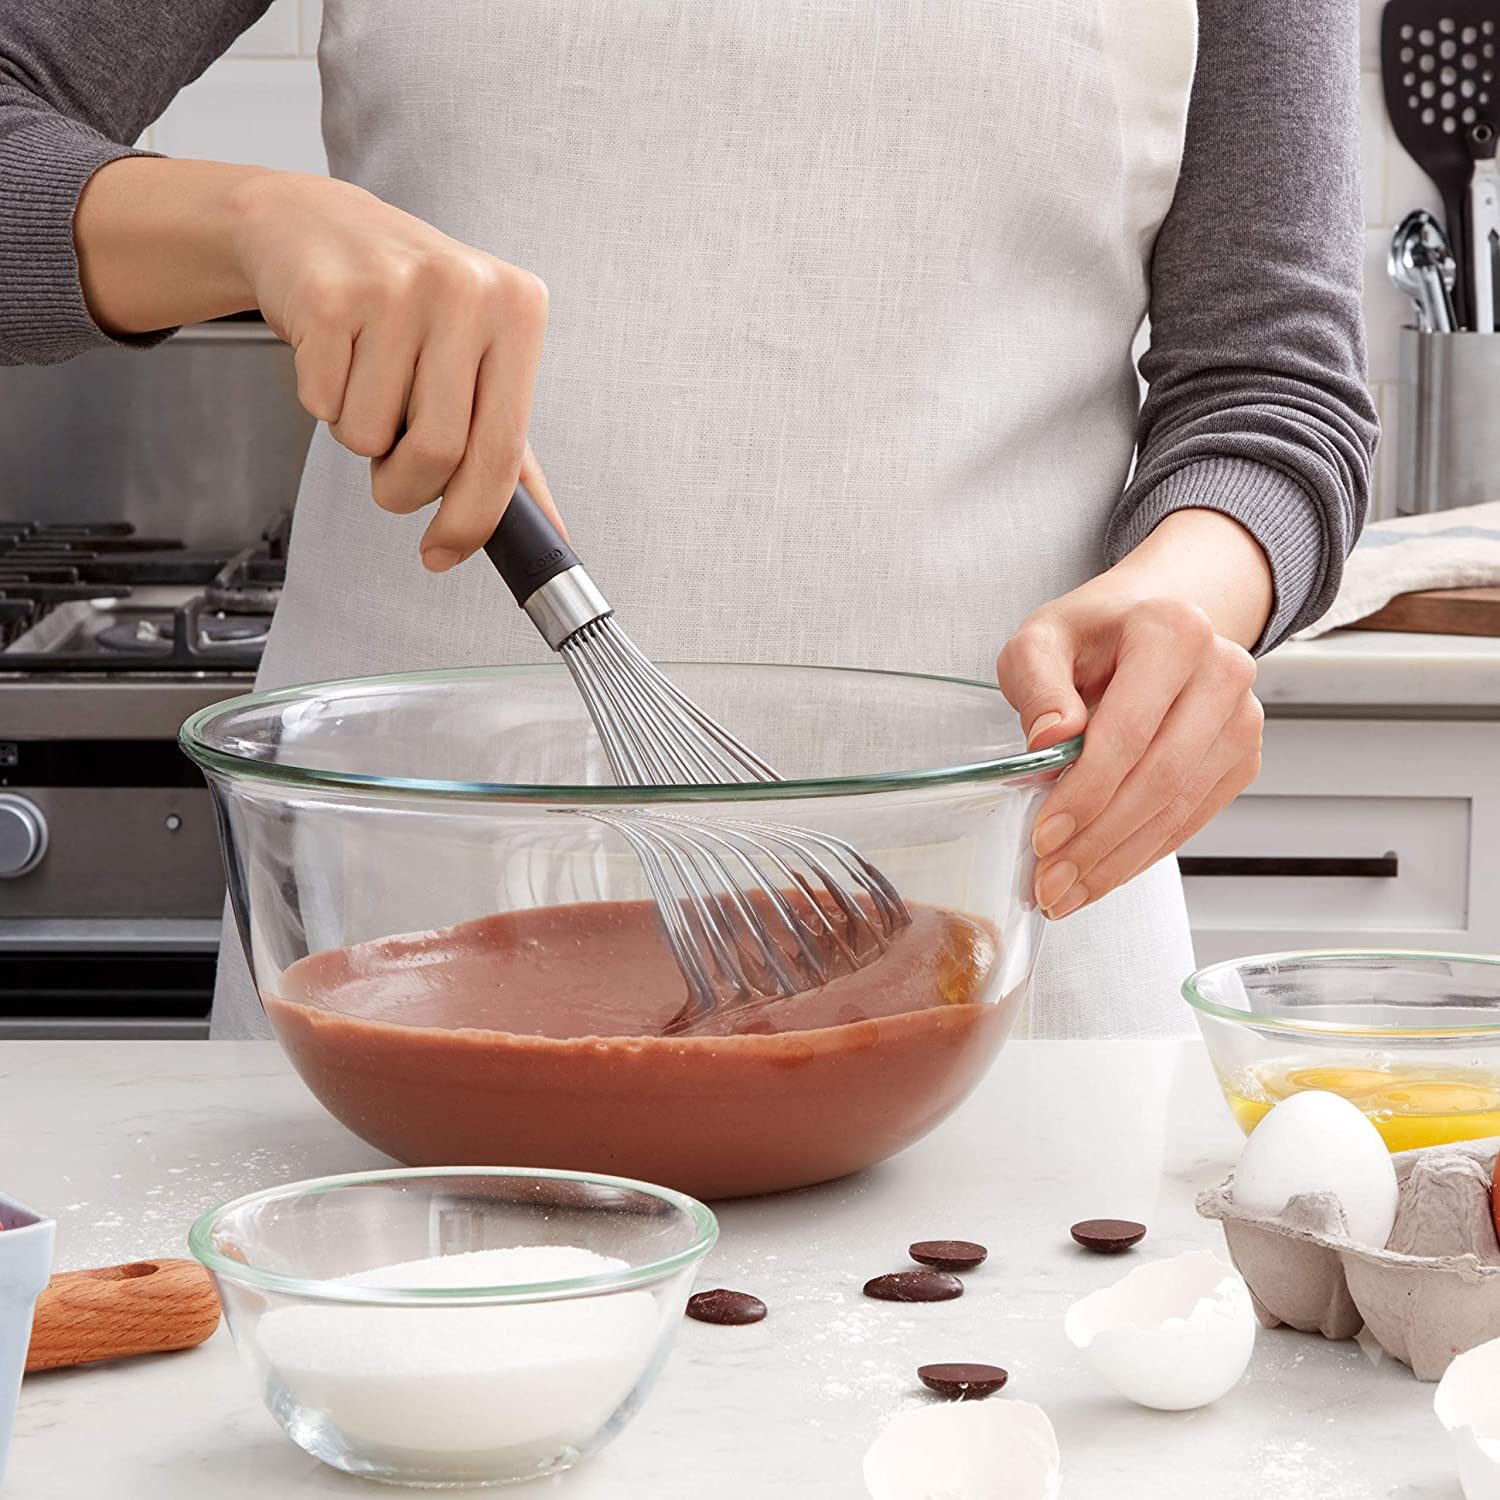 Why Should You Have These 10 Popular Kitchen Gadgets In You Home?